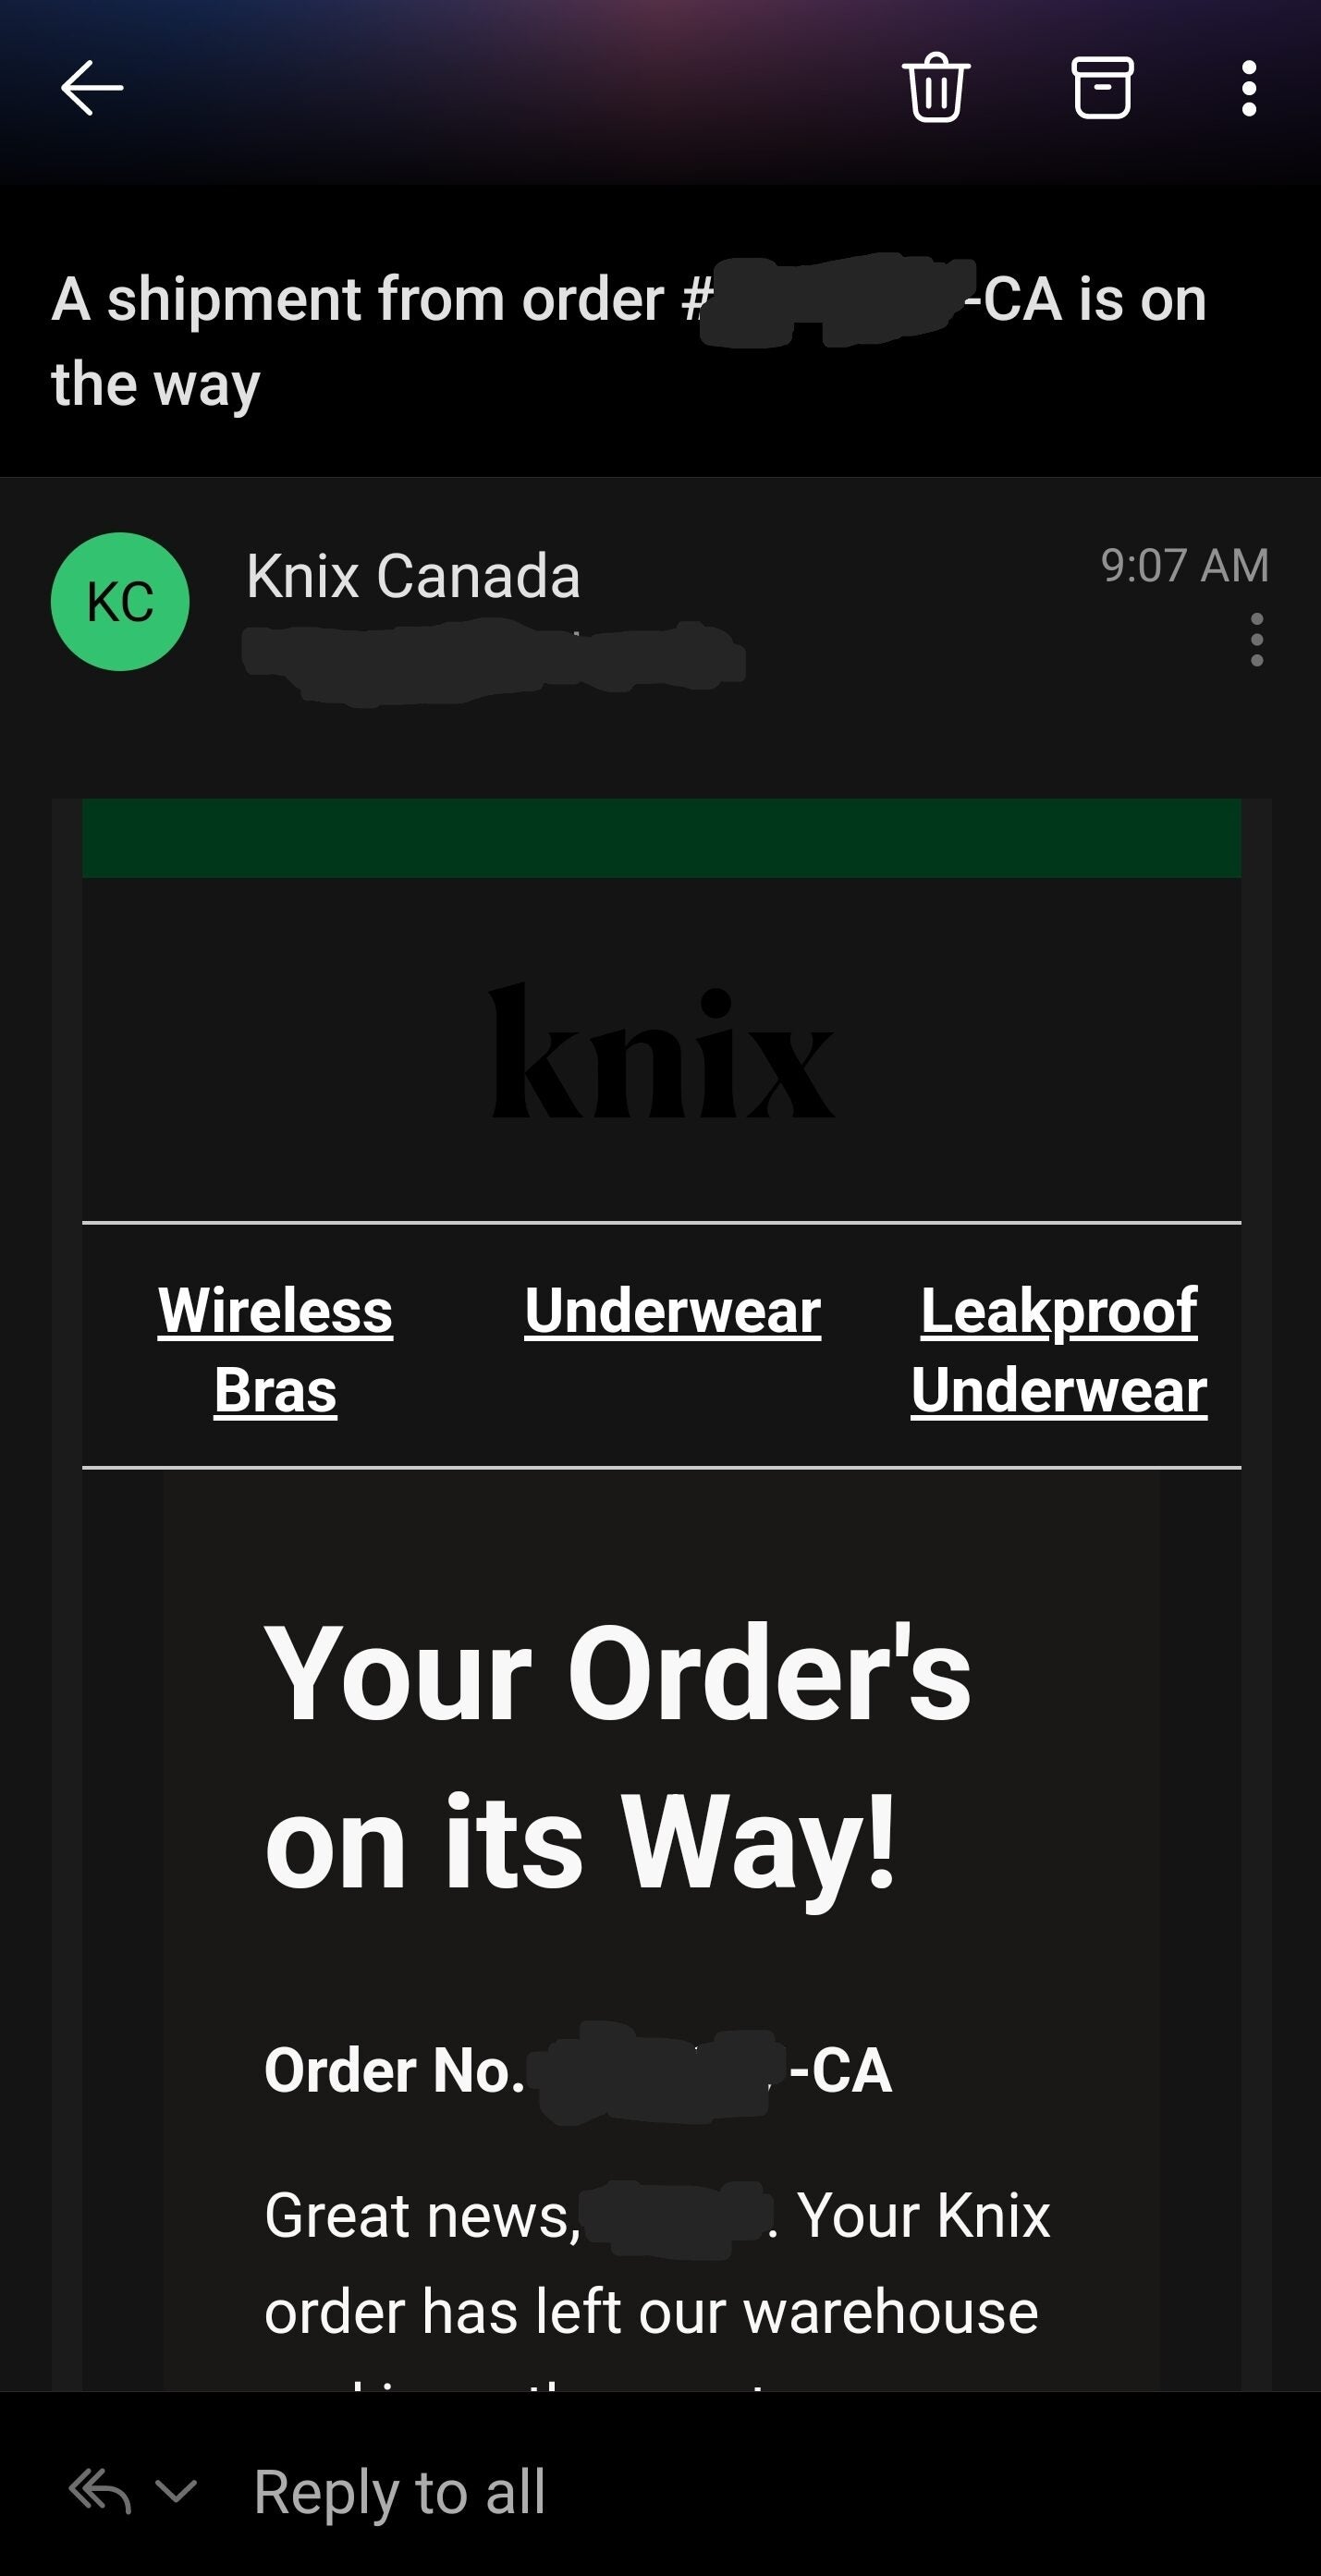 Knix Canada] HOT - Buy now, think later - Knix Canada promo code gives you  your order for free (just pay shipping) - Page 5 - RedFlagDeals.com Forums